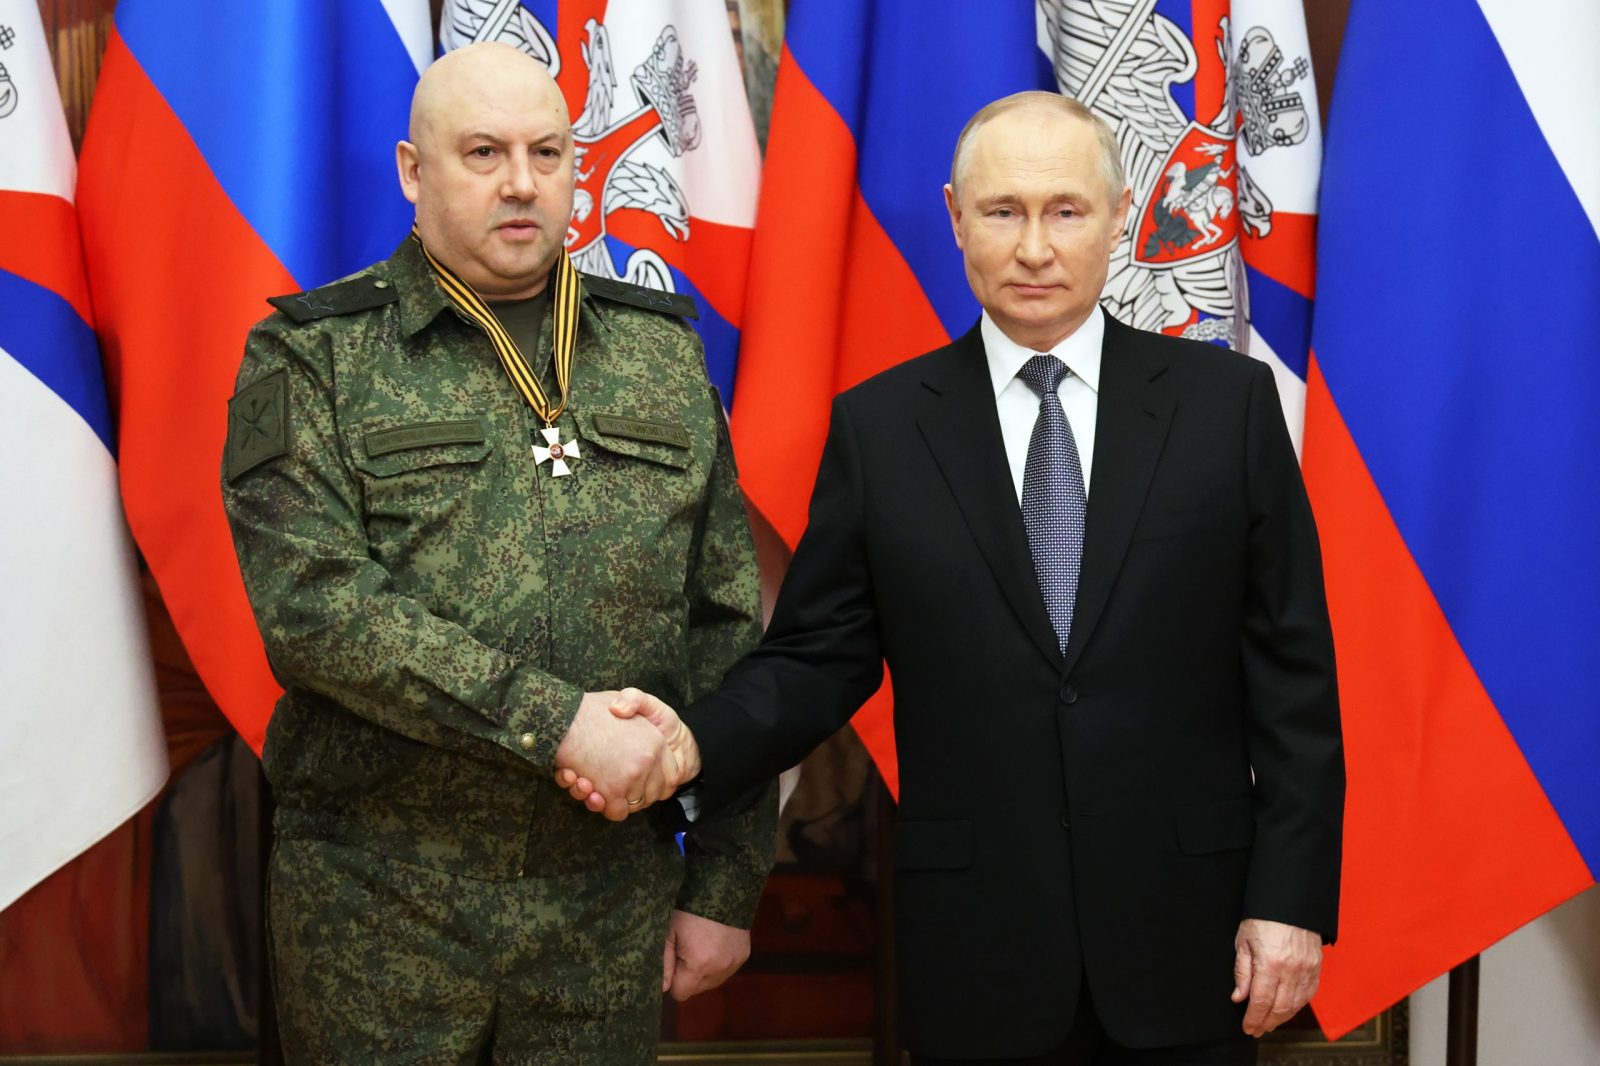 epa10384013 Russian President Vladimir Putin (R) shakes hands with commander of Russia's military operation in Ukraine General Sergei Surovikin, awarded with order of Saint George of the Third Class, during his visit to the Southern Military District, as Russia's so-called "special military operation" continues, at an undisclosed location in Rostov region, Russia, 31 December 2022.  EPA/MIKHAEL KLIMENTYEV/SPUTNIK/KREMLIN POOL / POOL MANDATORY CREDIT